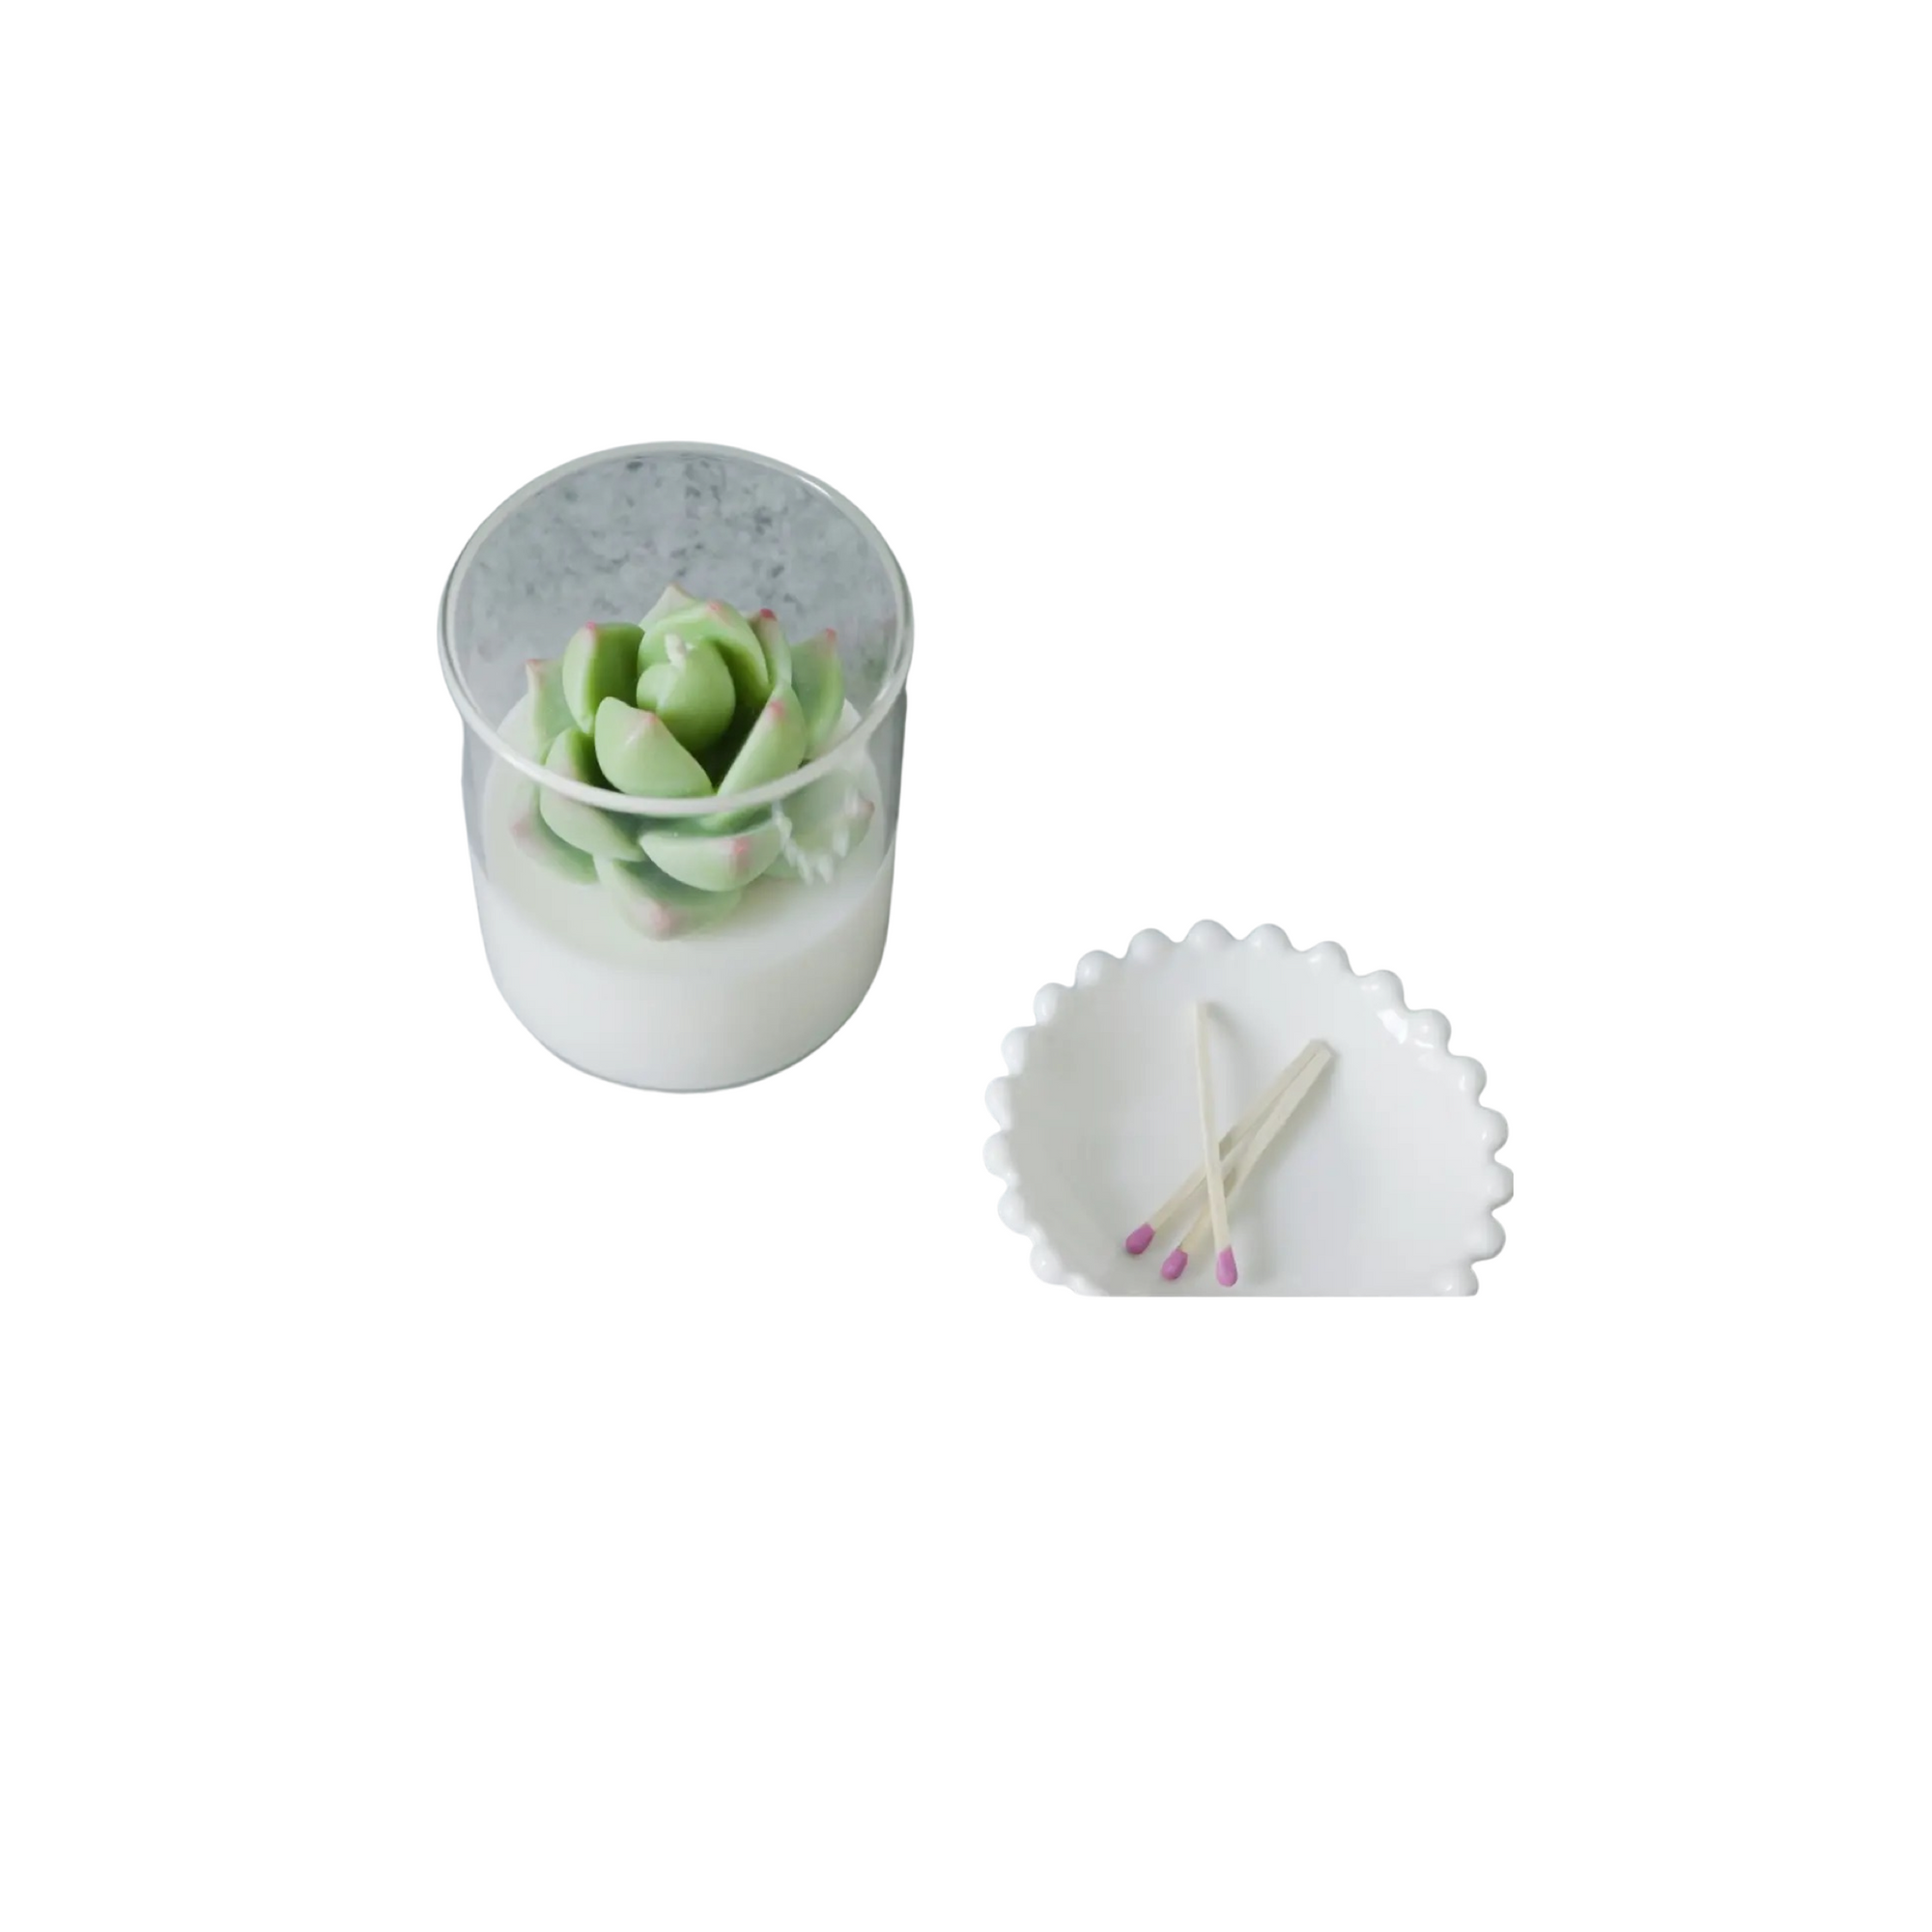 Anemone Floral Soy Candle